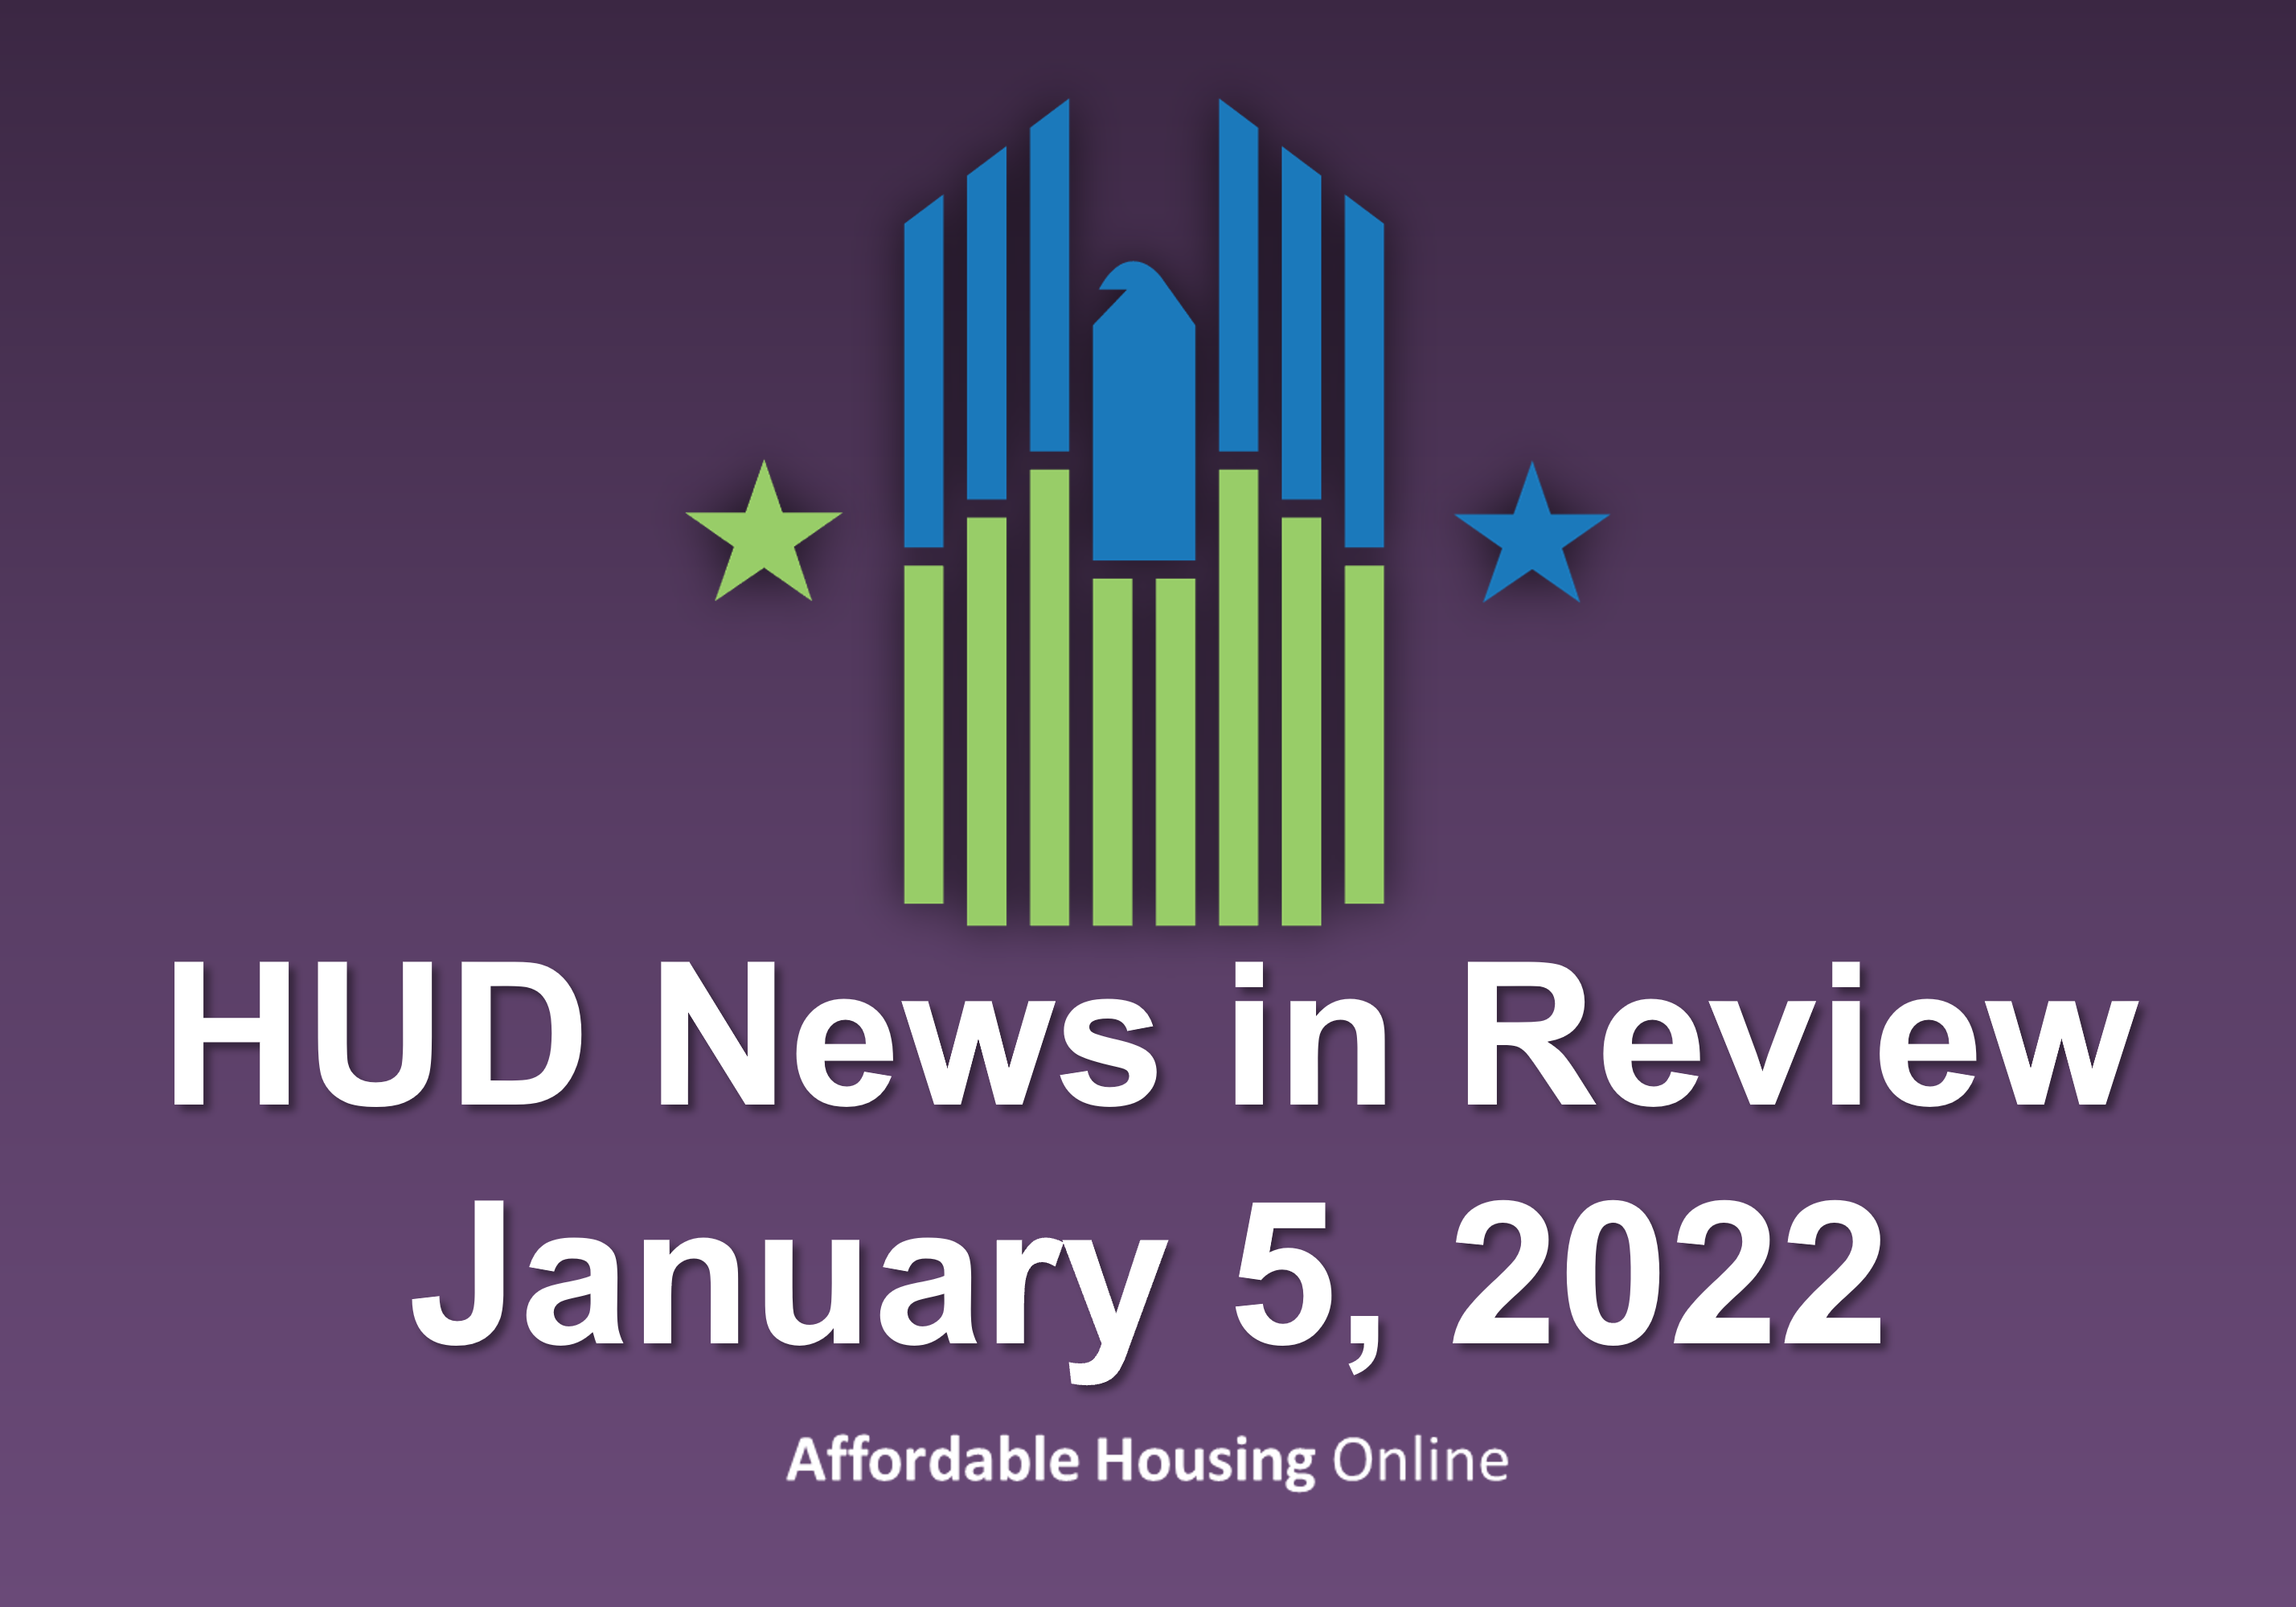 HUD News in Review banner image for January 5, 2022